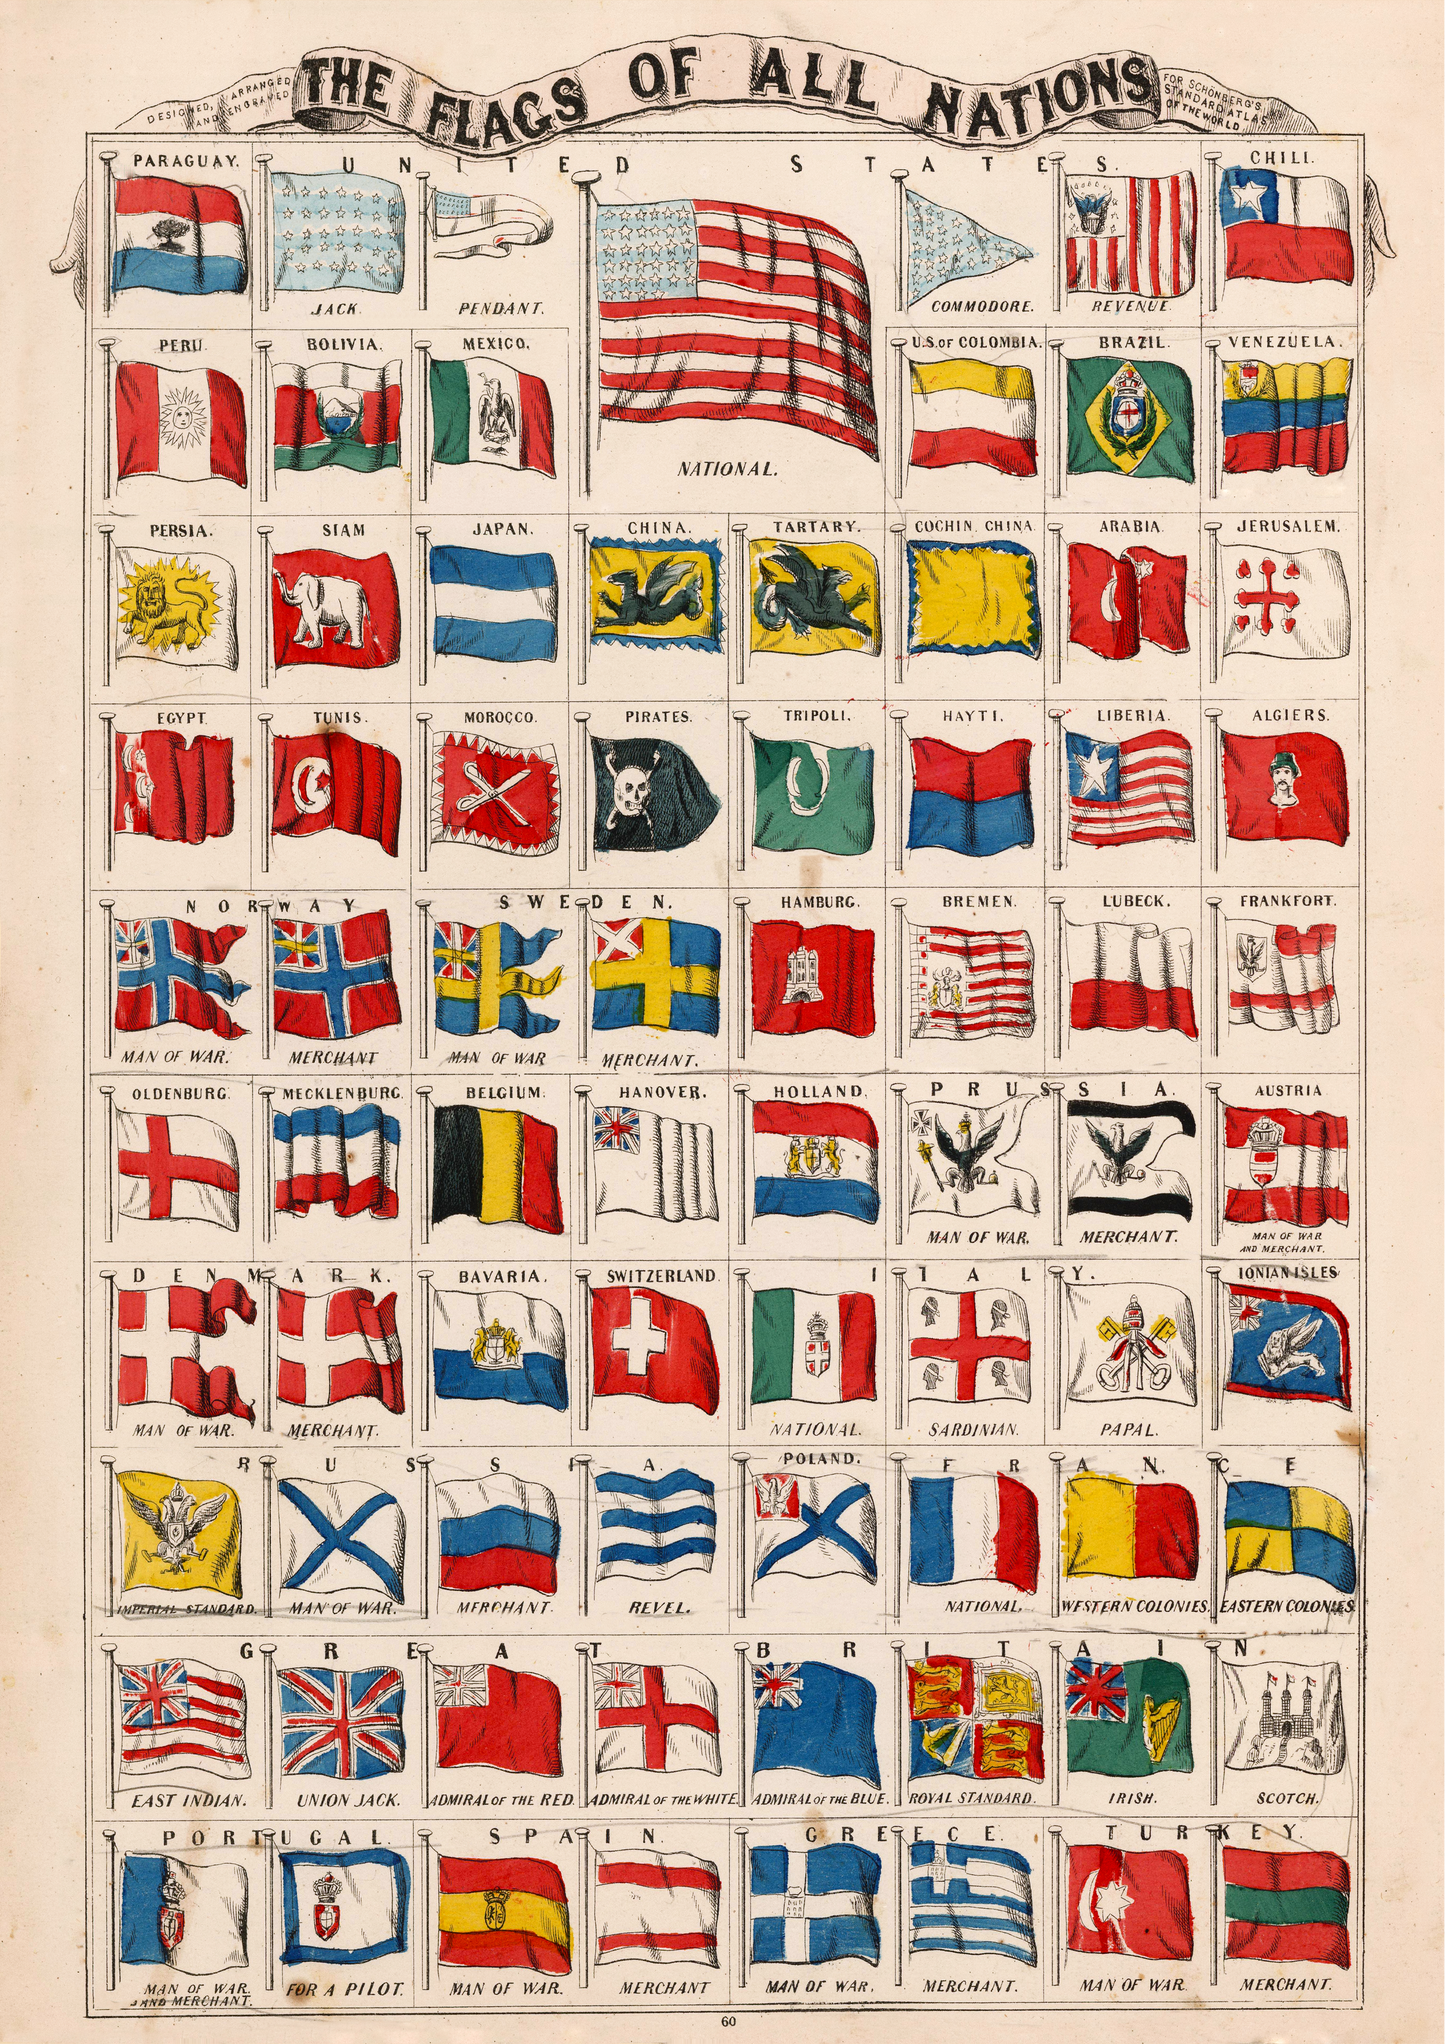 Flags of All Nations - American poster